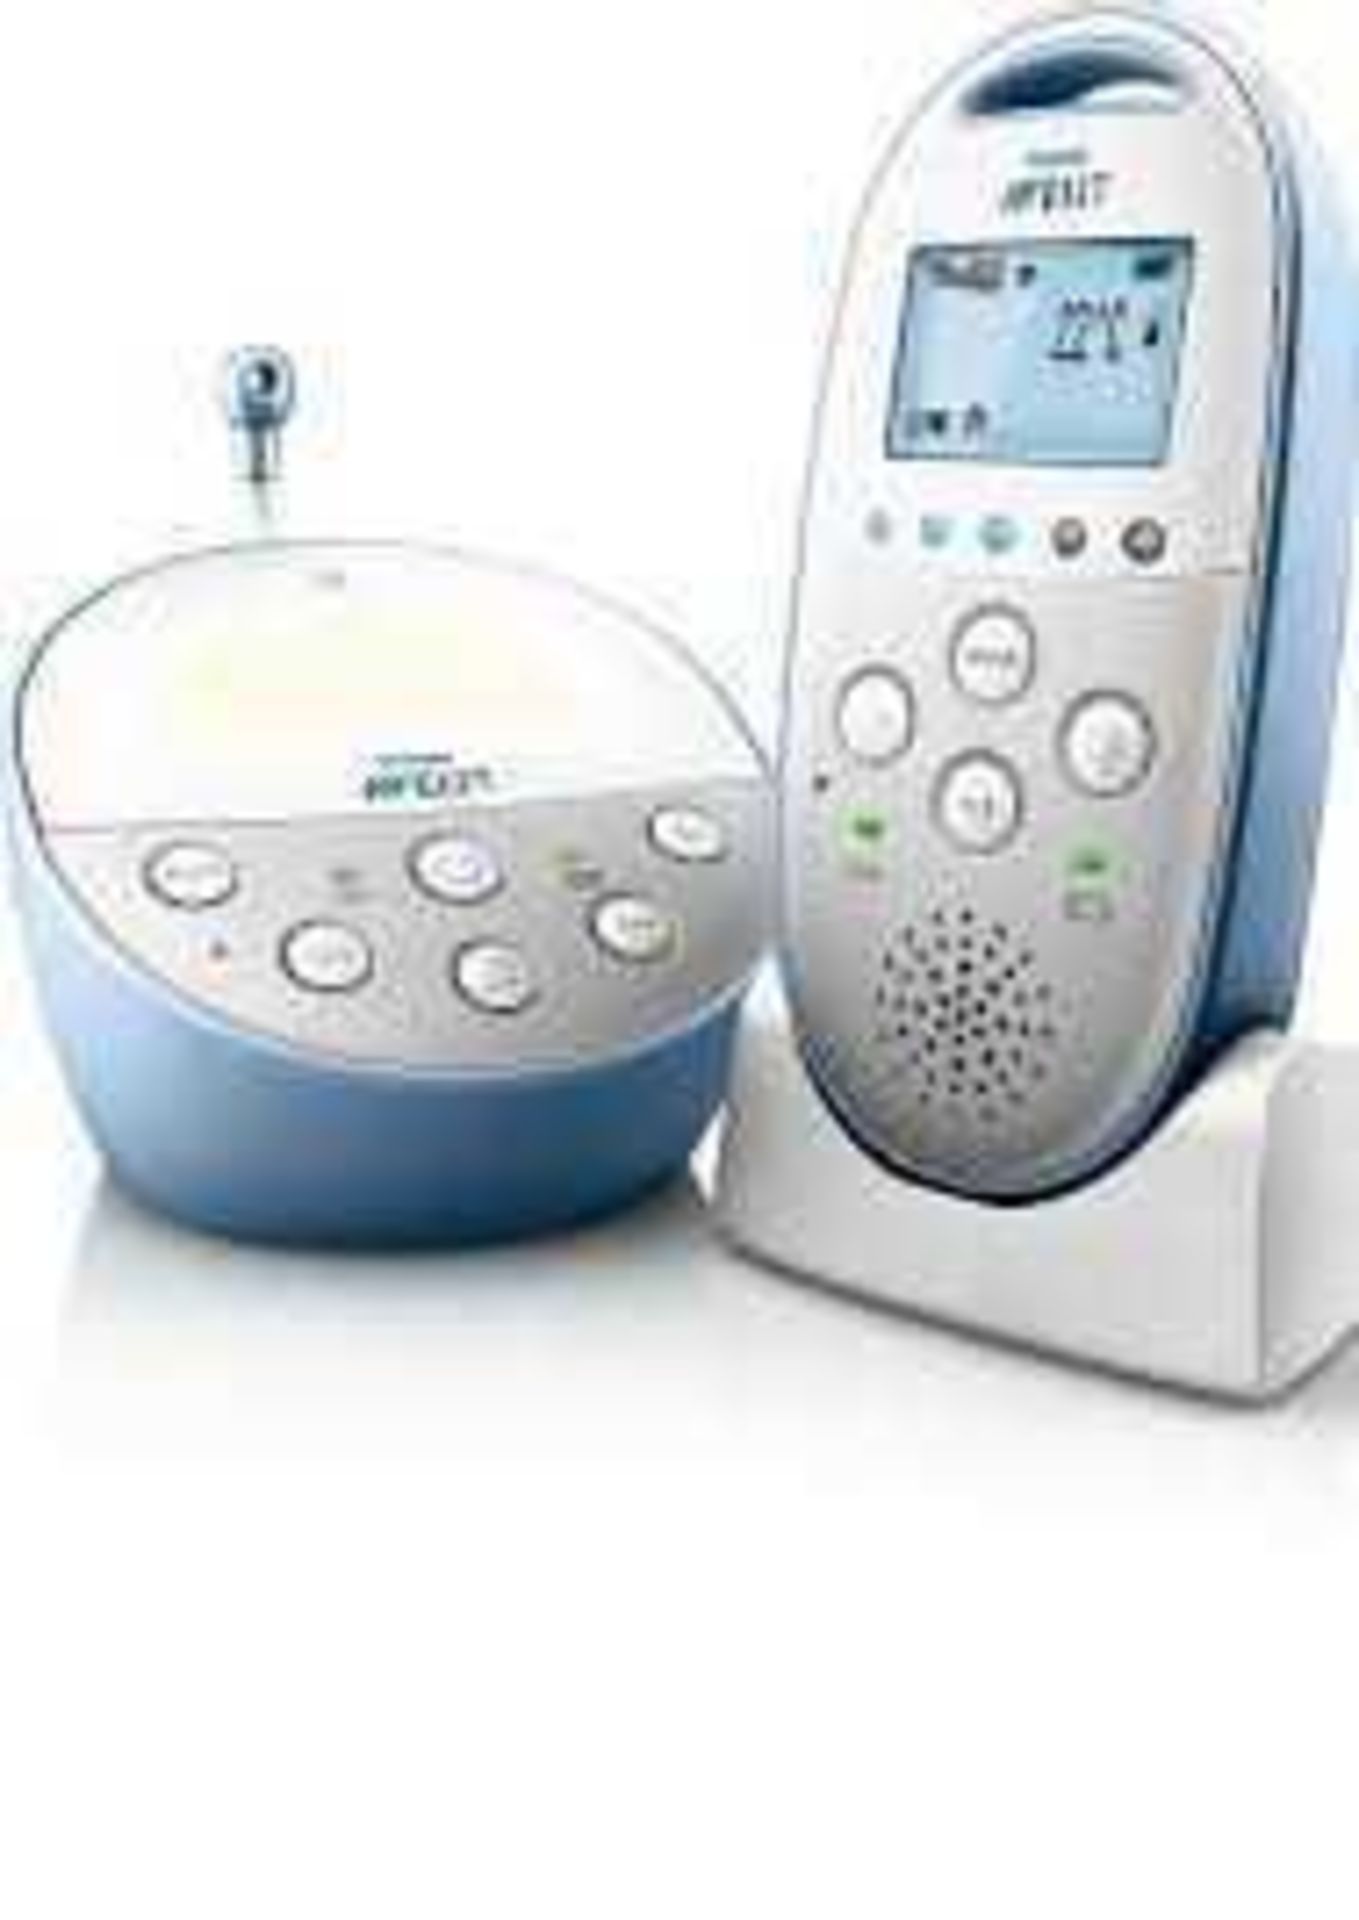 RRP £120 Boxed Phillips Avent Scd850 Baby Monitor Set (117117) (Appraisals Are Available On Request)